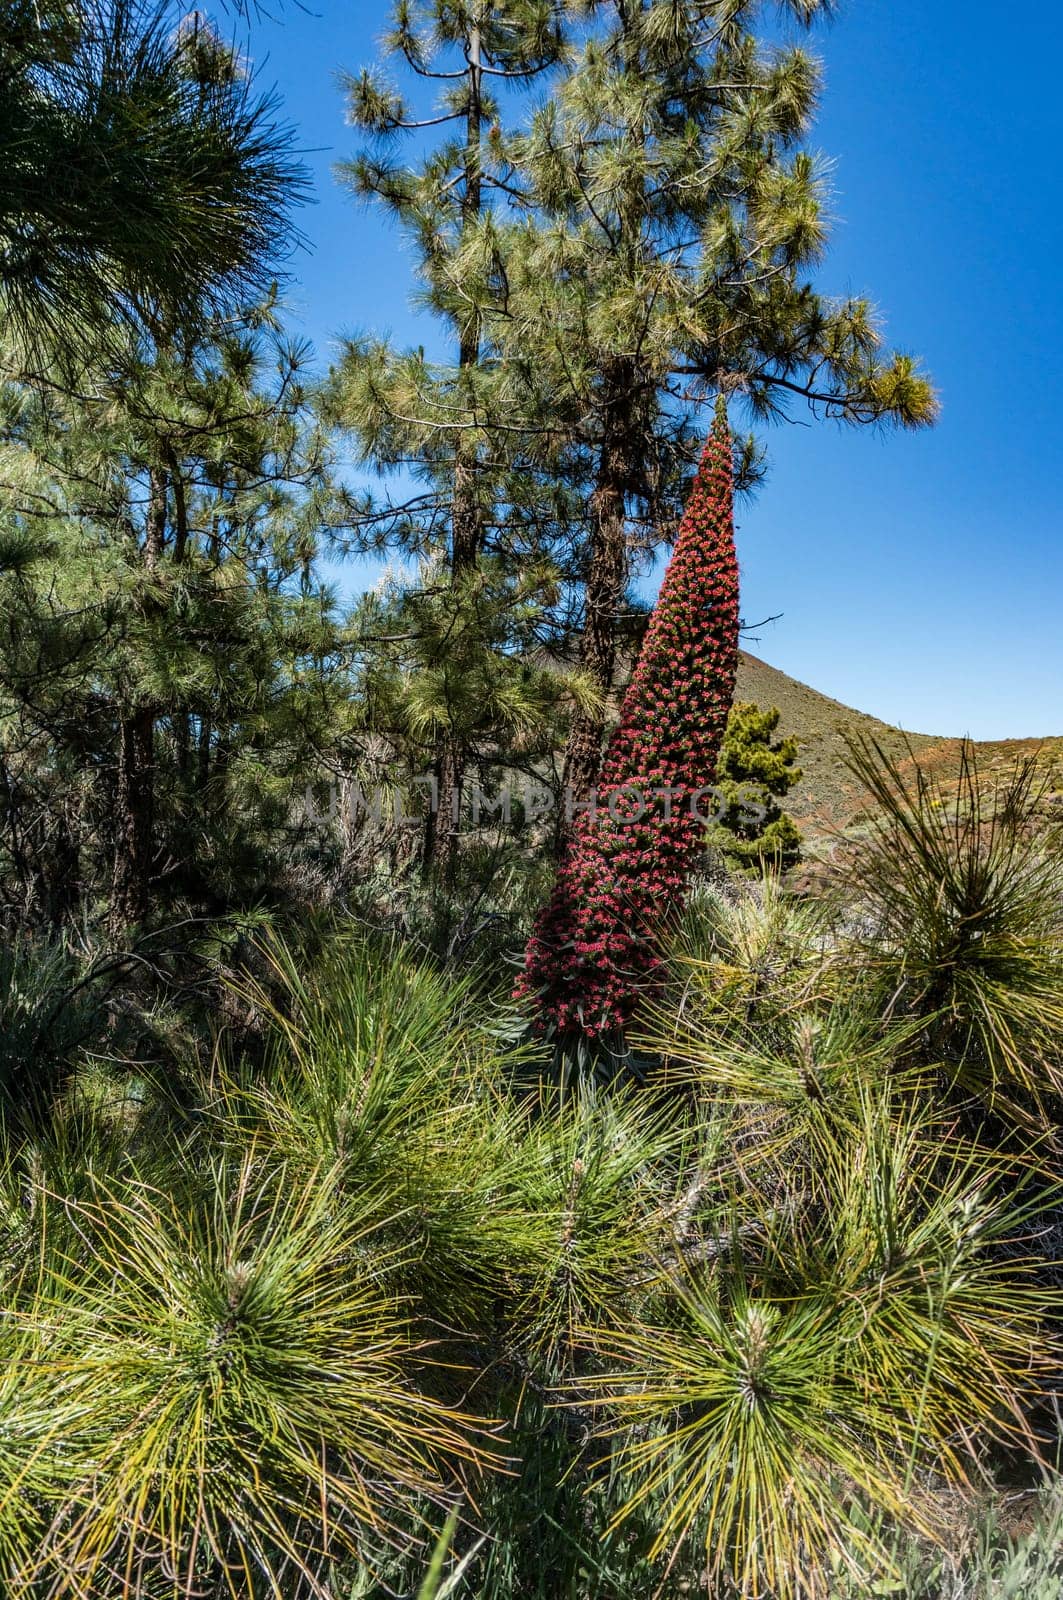 Red Flower of tajinaste rojo among Canary Island pine trees with young shoots. Endemics to the Canary islands. Mountain background. Echium wildpretii, tower of jewels, red bugloss, Tenerife bugloss